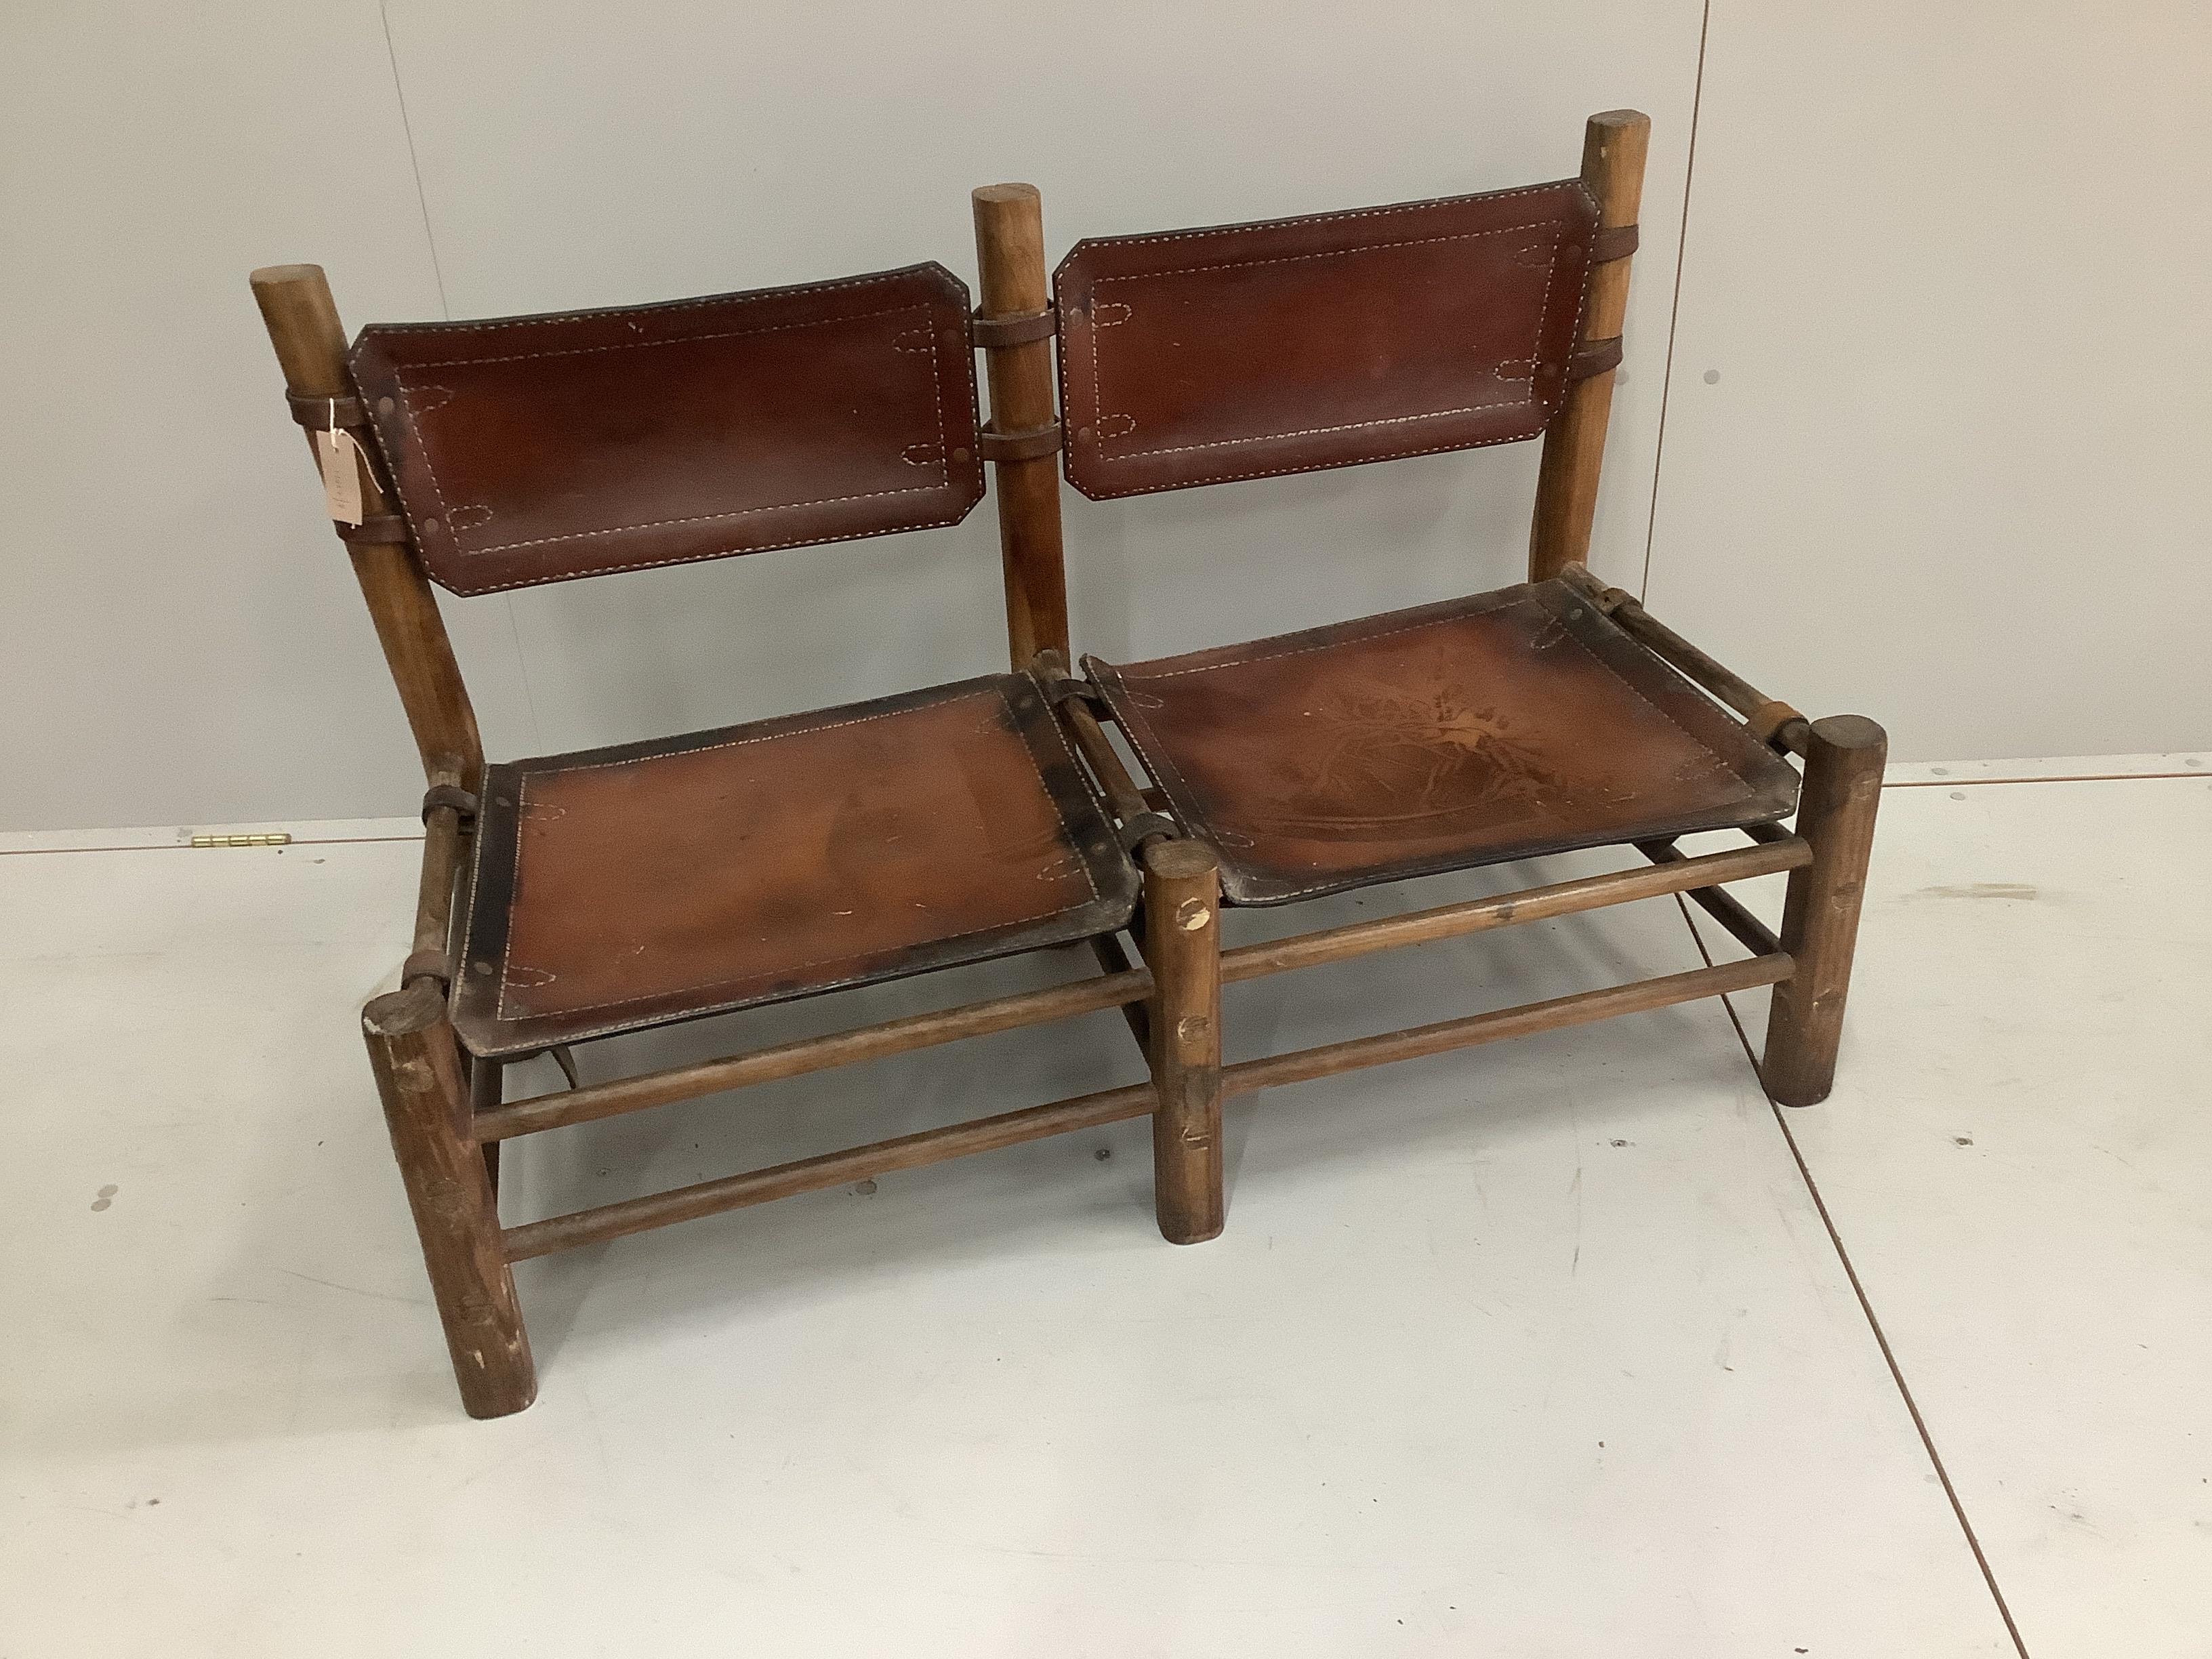 A Native American hardwood and leather double chair seat, width 116cm, depth 48cm, height 73cm                                                                                                                              